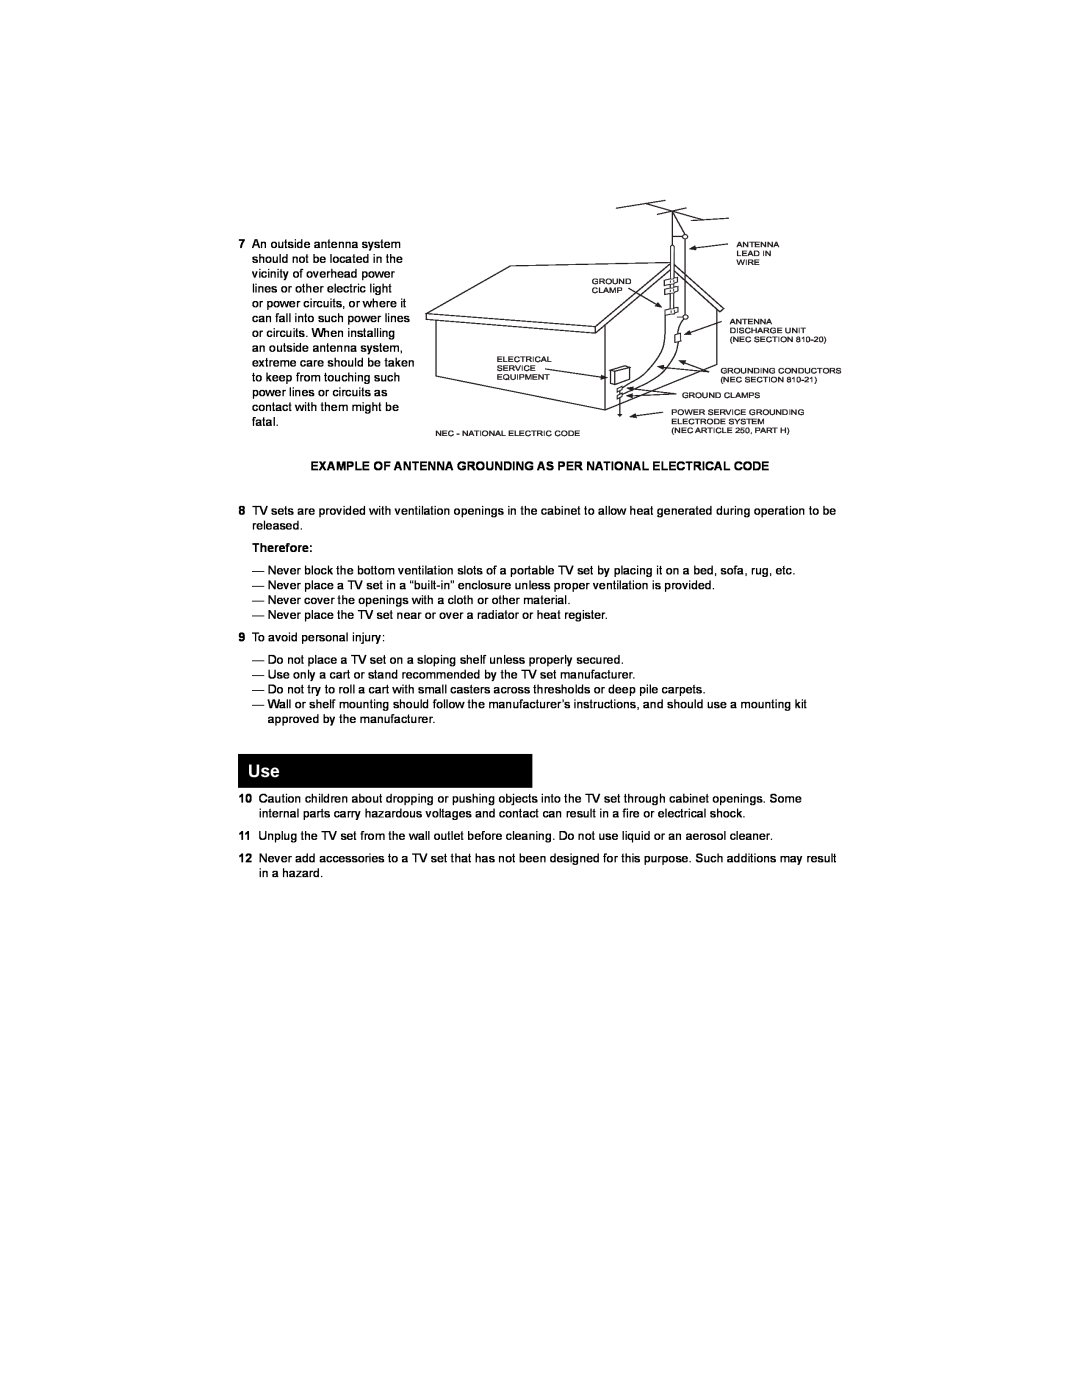 JVC AV 20FA44 manual Example Of Antenna Grounding As Per National Electrical Code, Therefore 